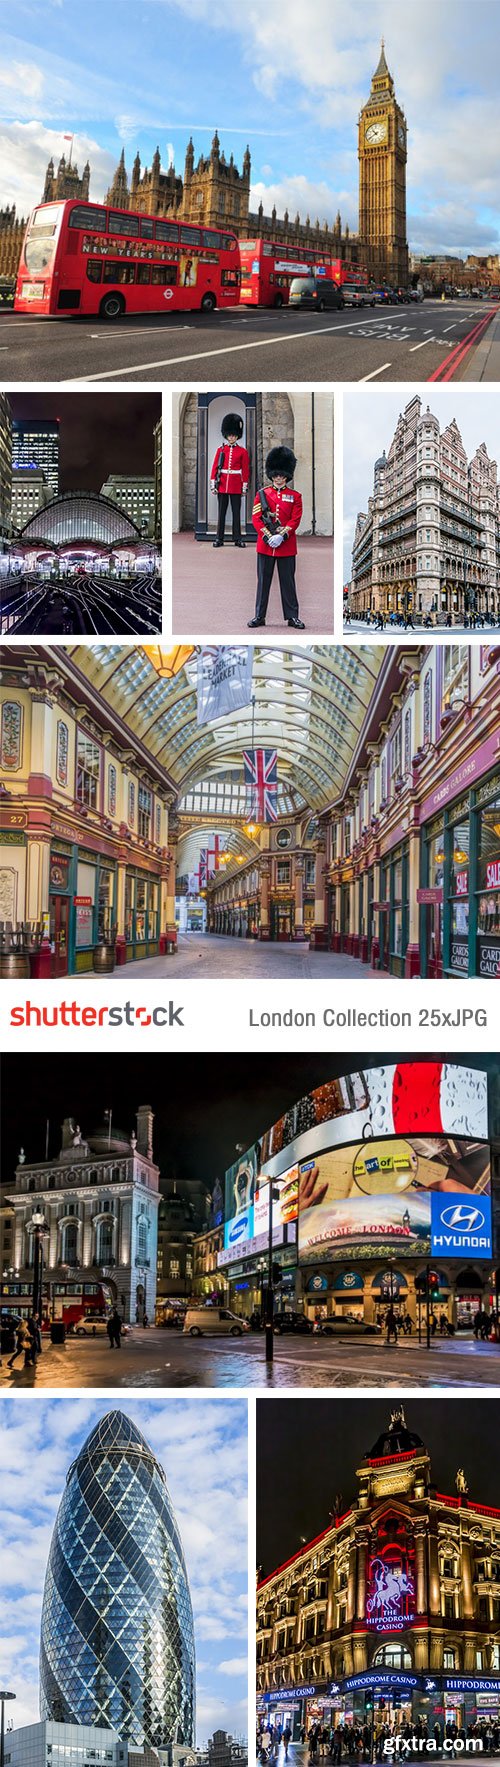 London Collection 25xJPG